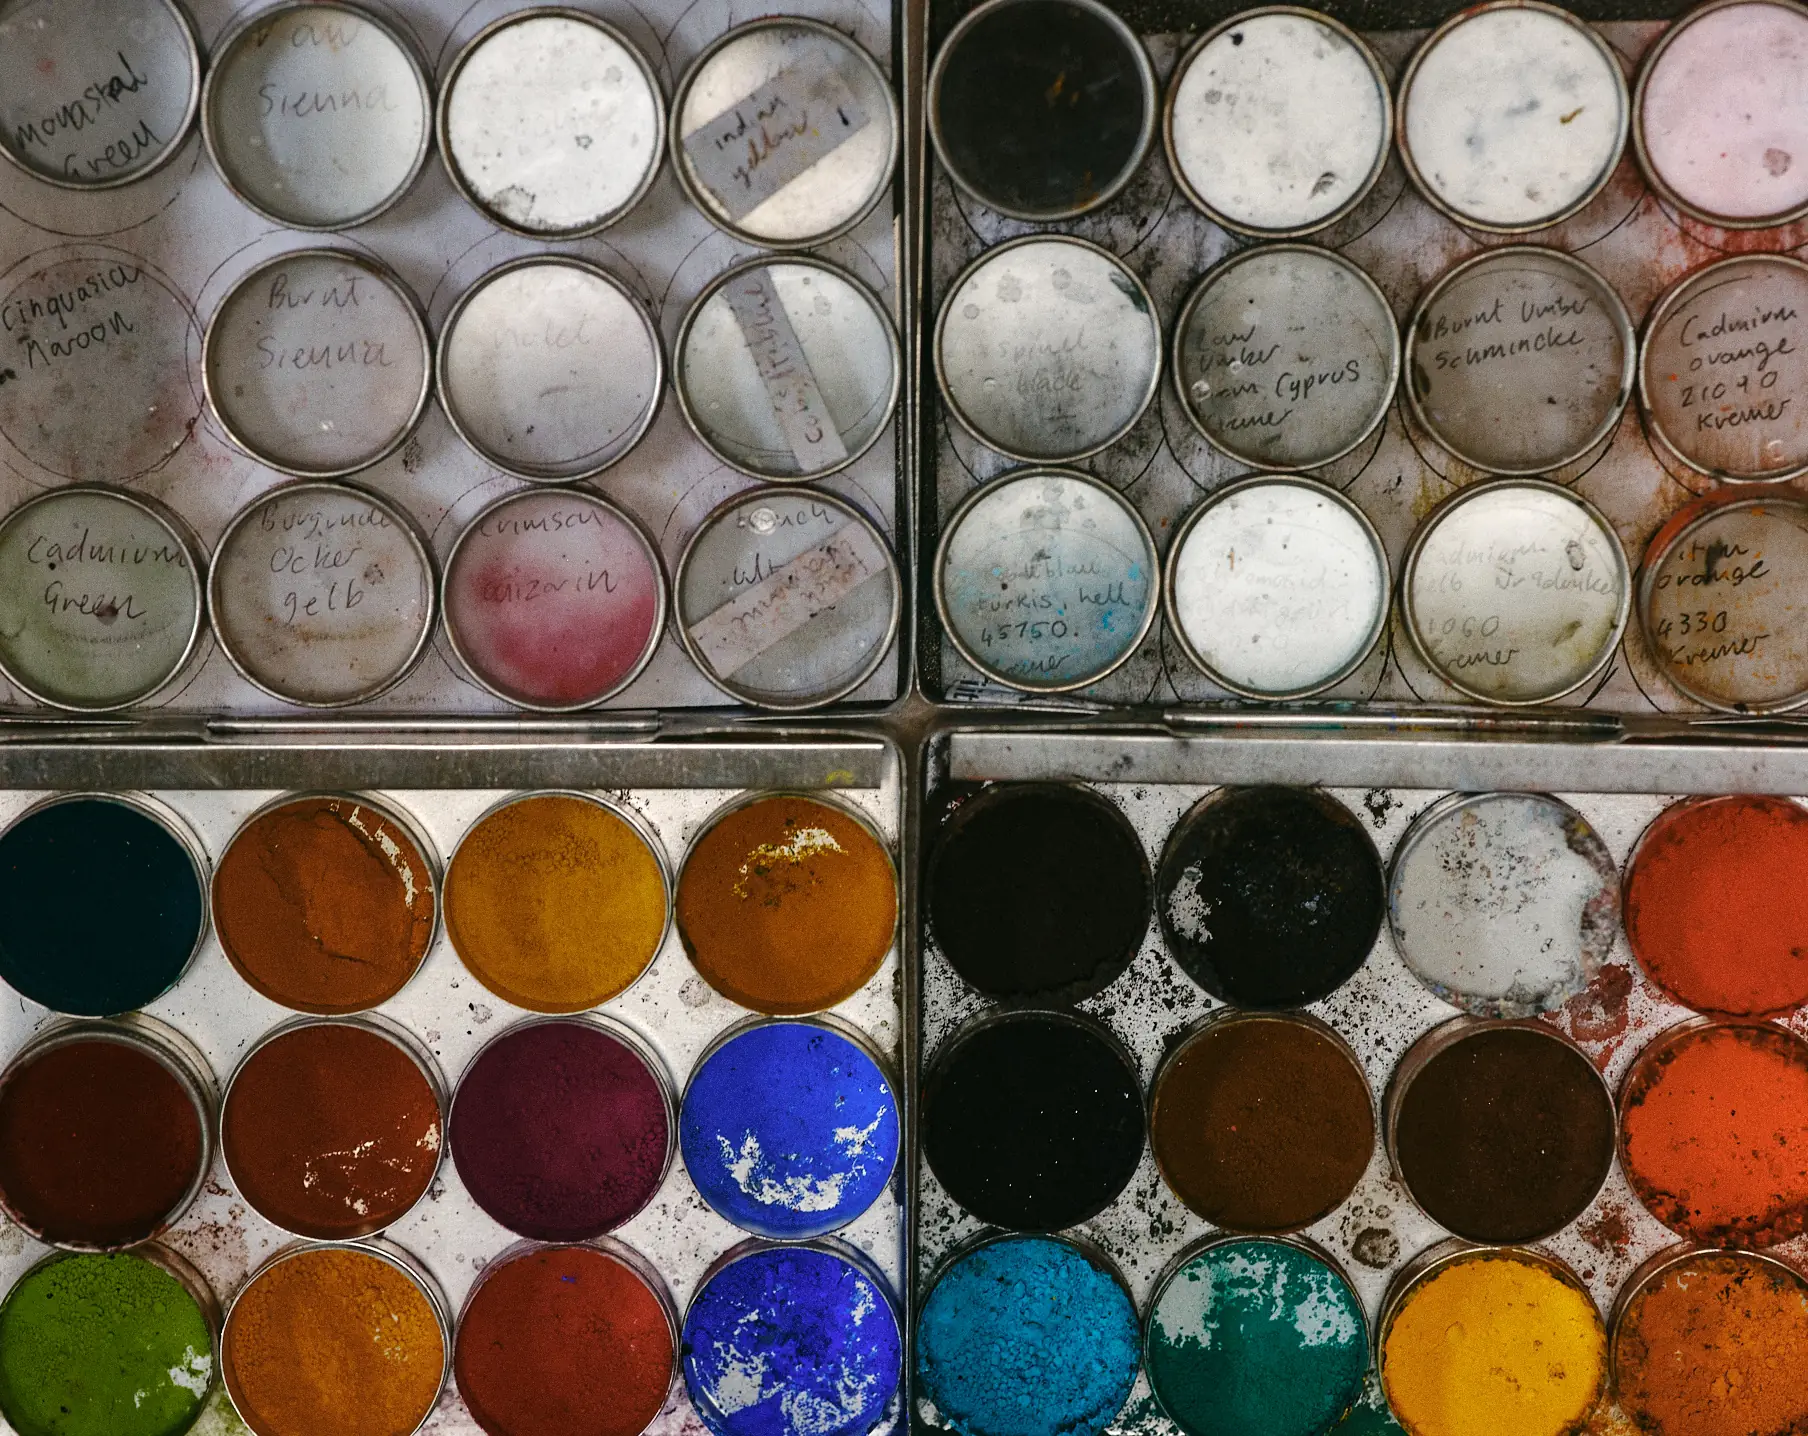 A photo of a small pots containing pigments.